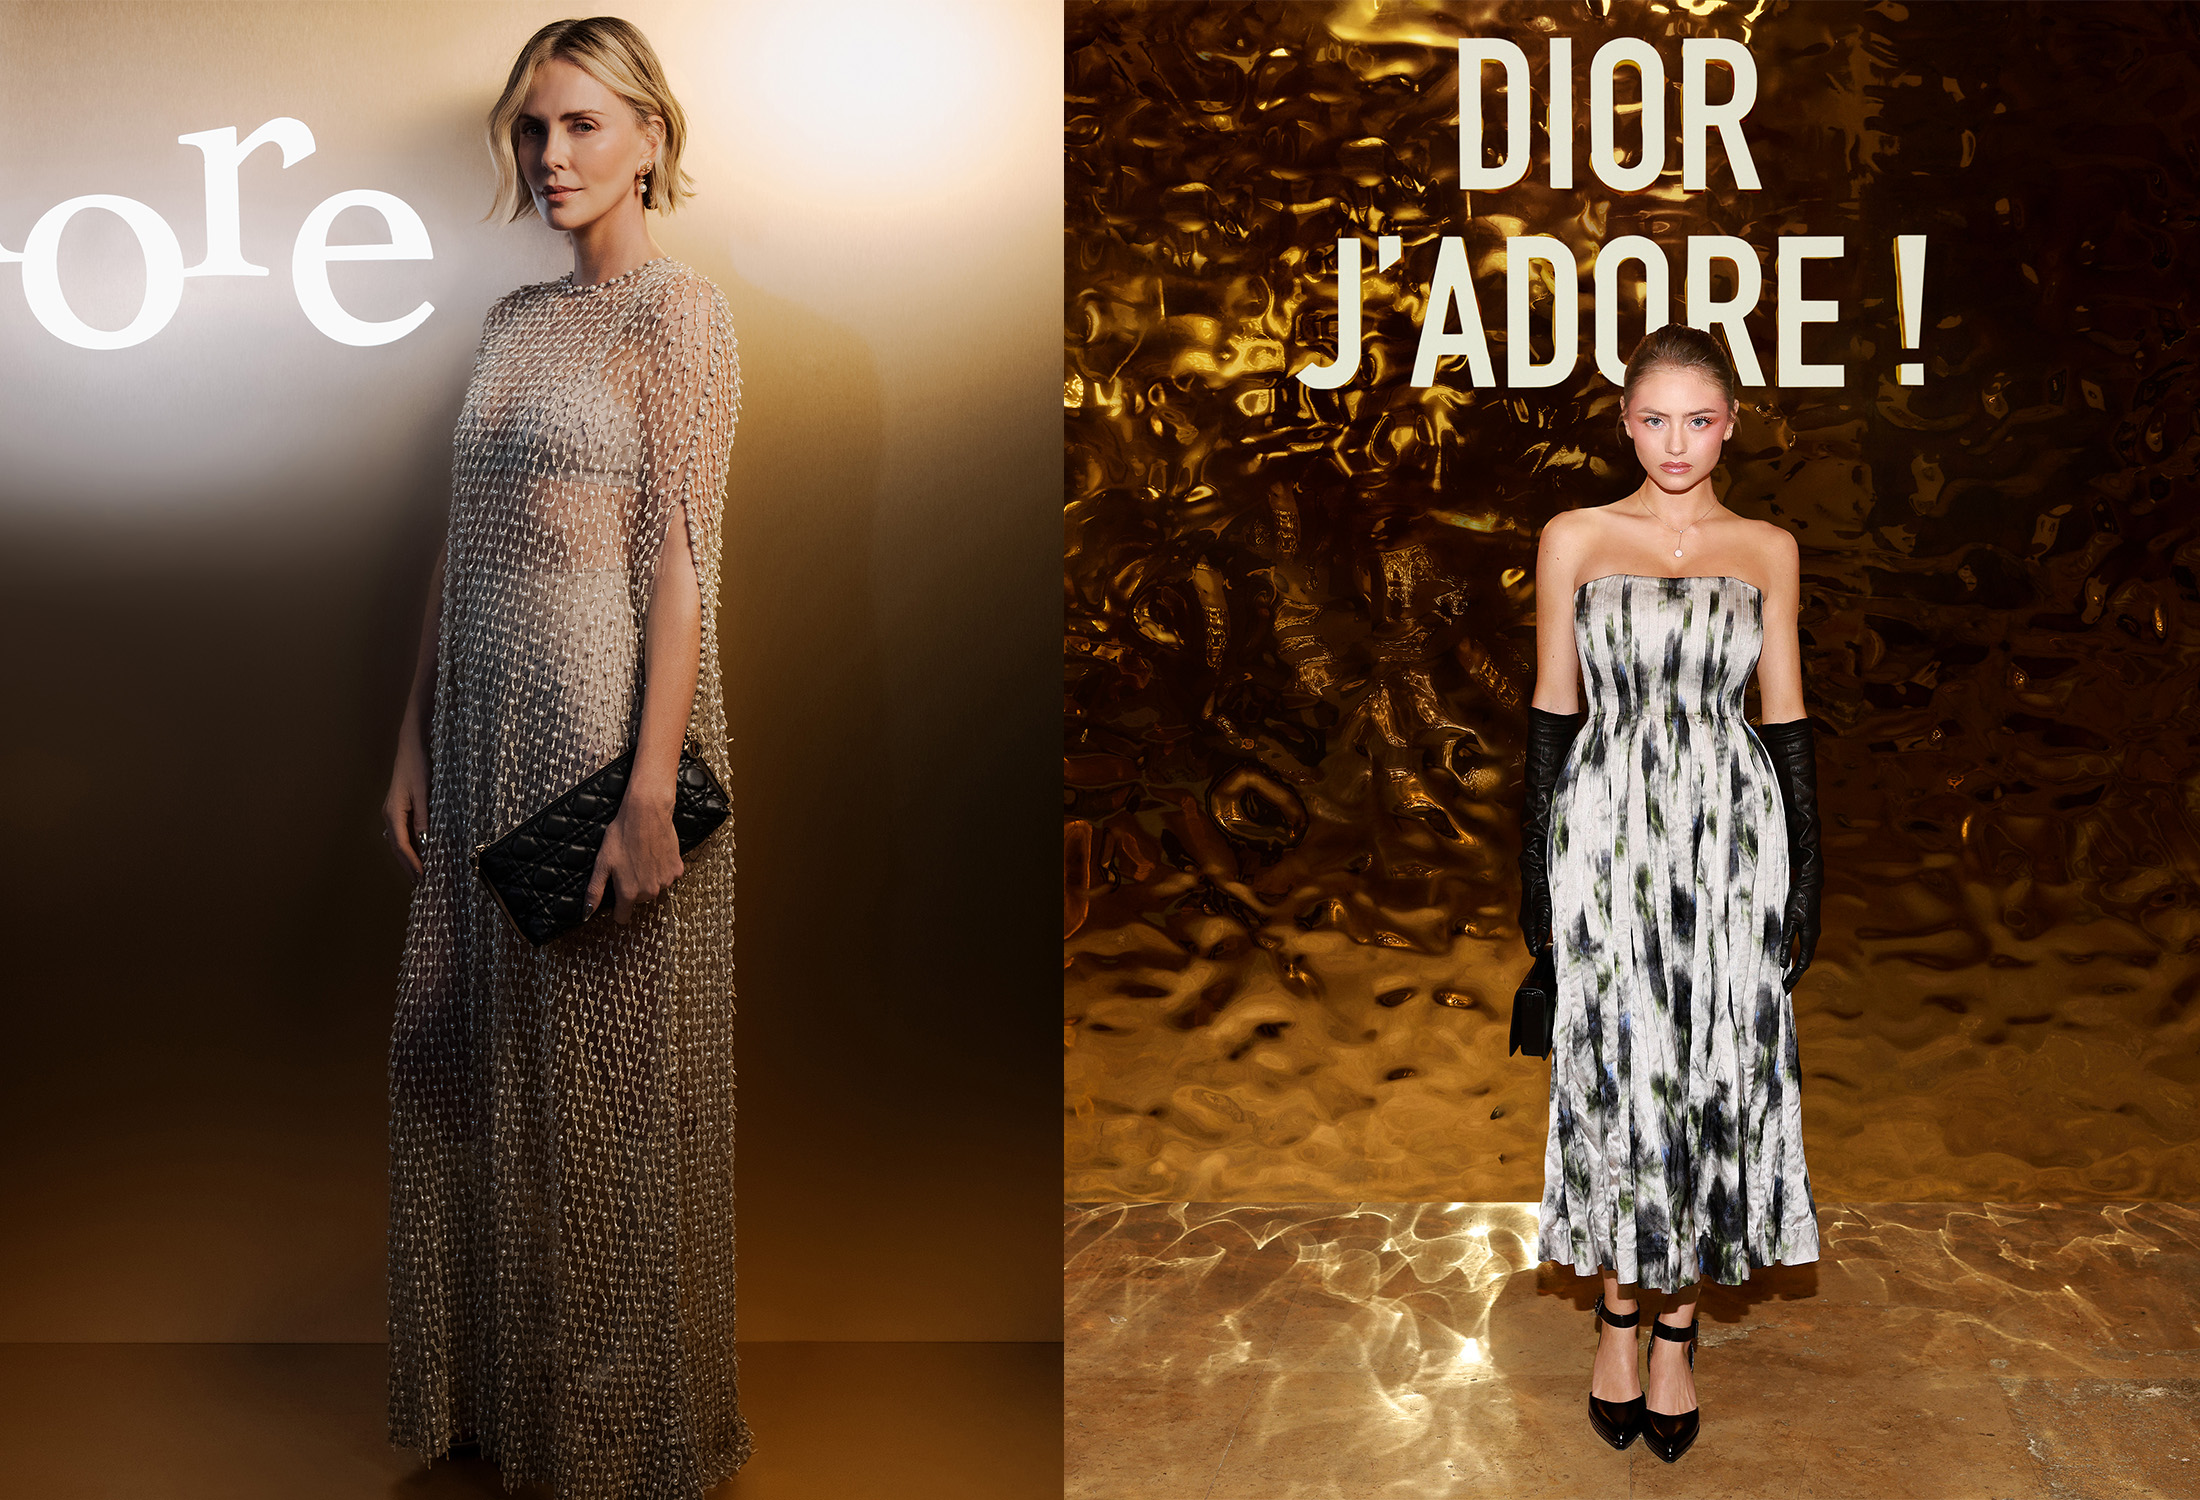 The Celebrities Dressed in Dior Haute Couture and Dior by Maria